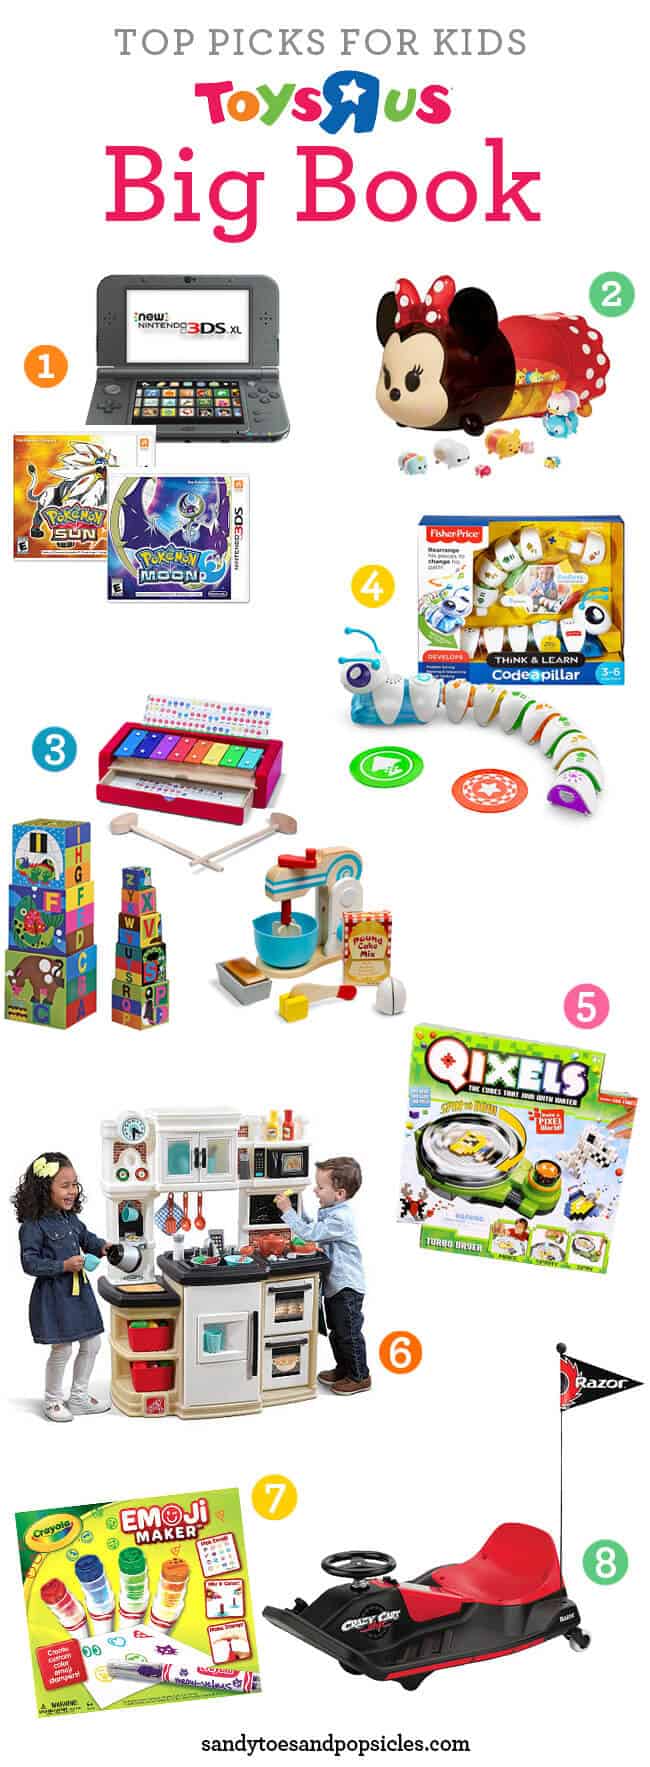 toys-r-us-big-book-top-gifts